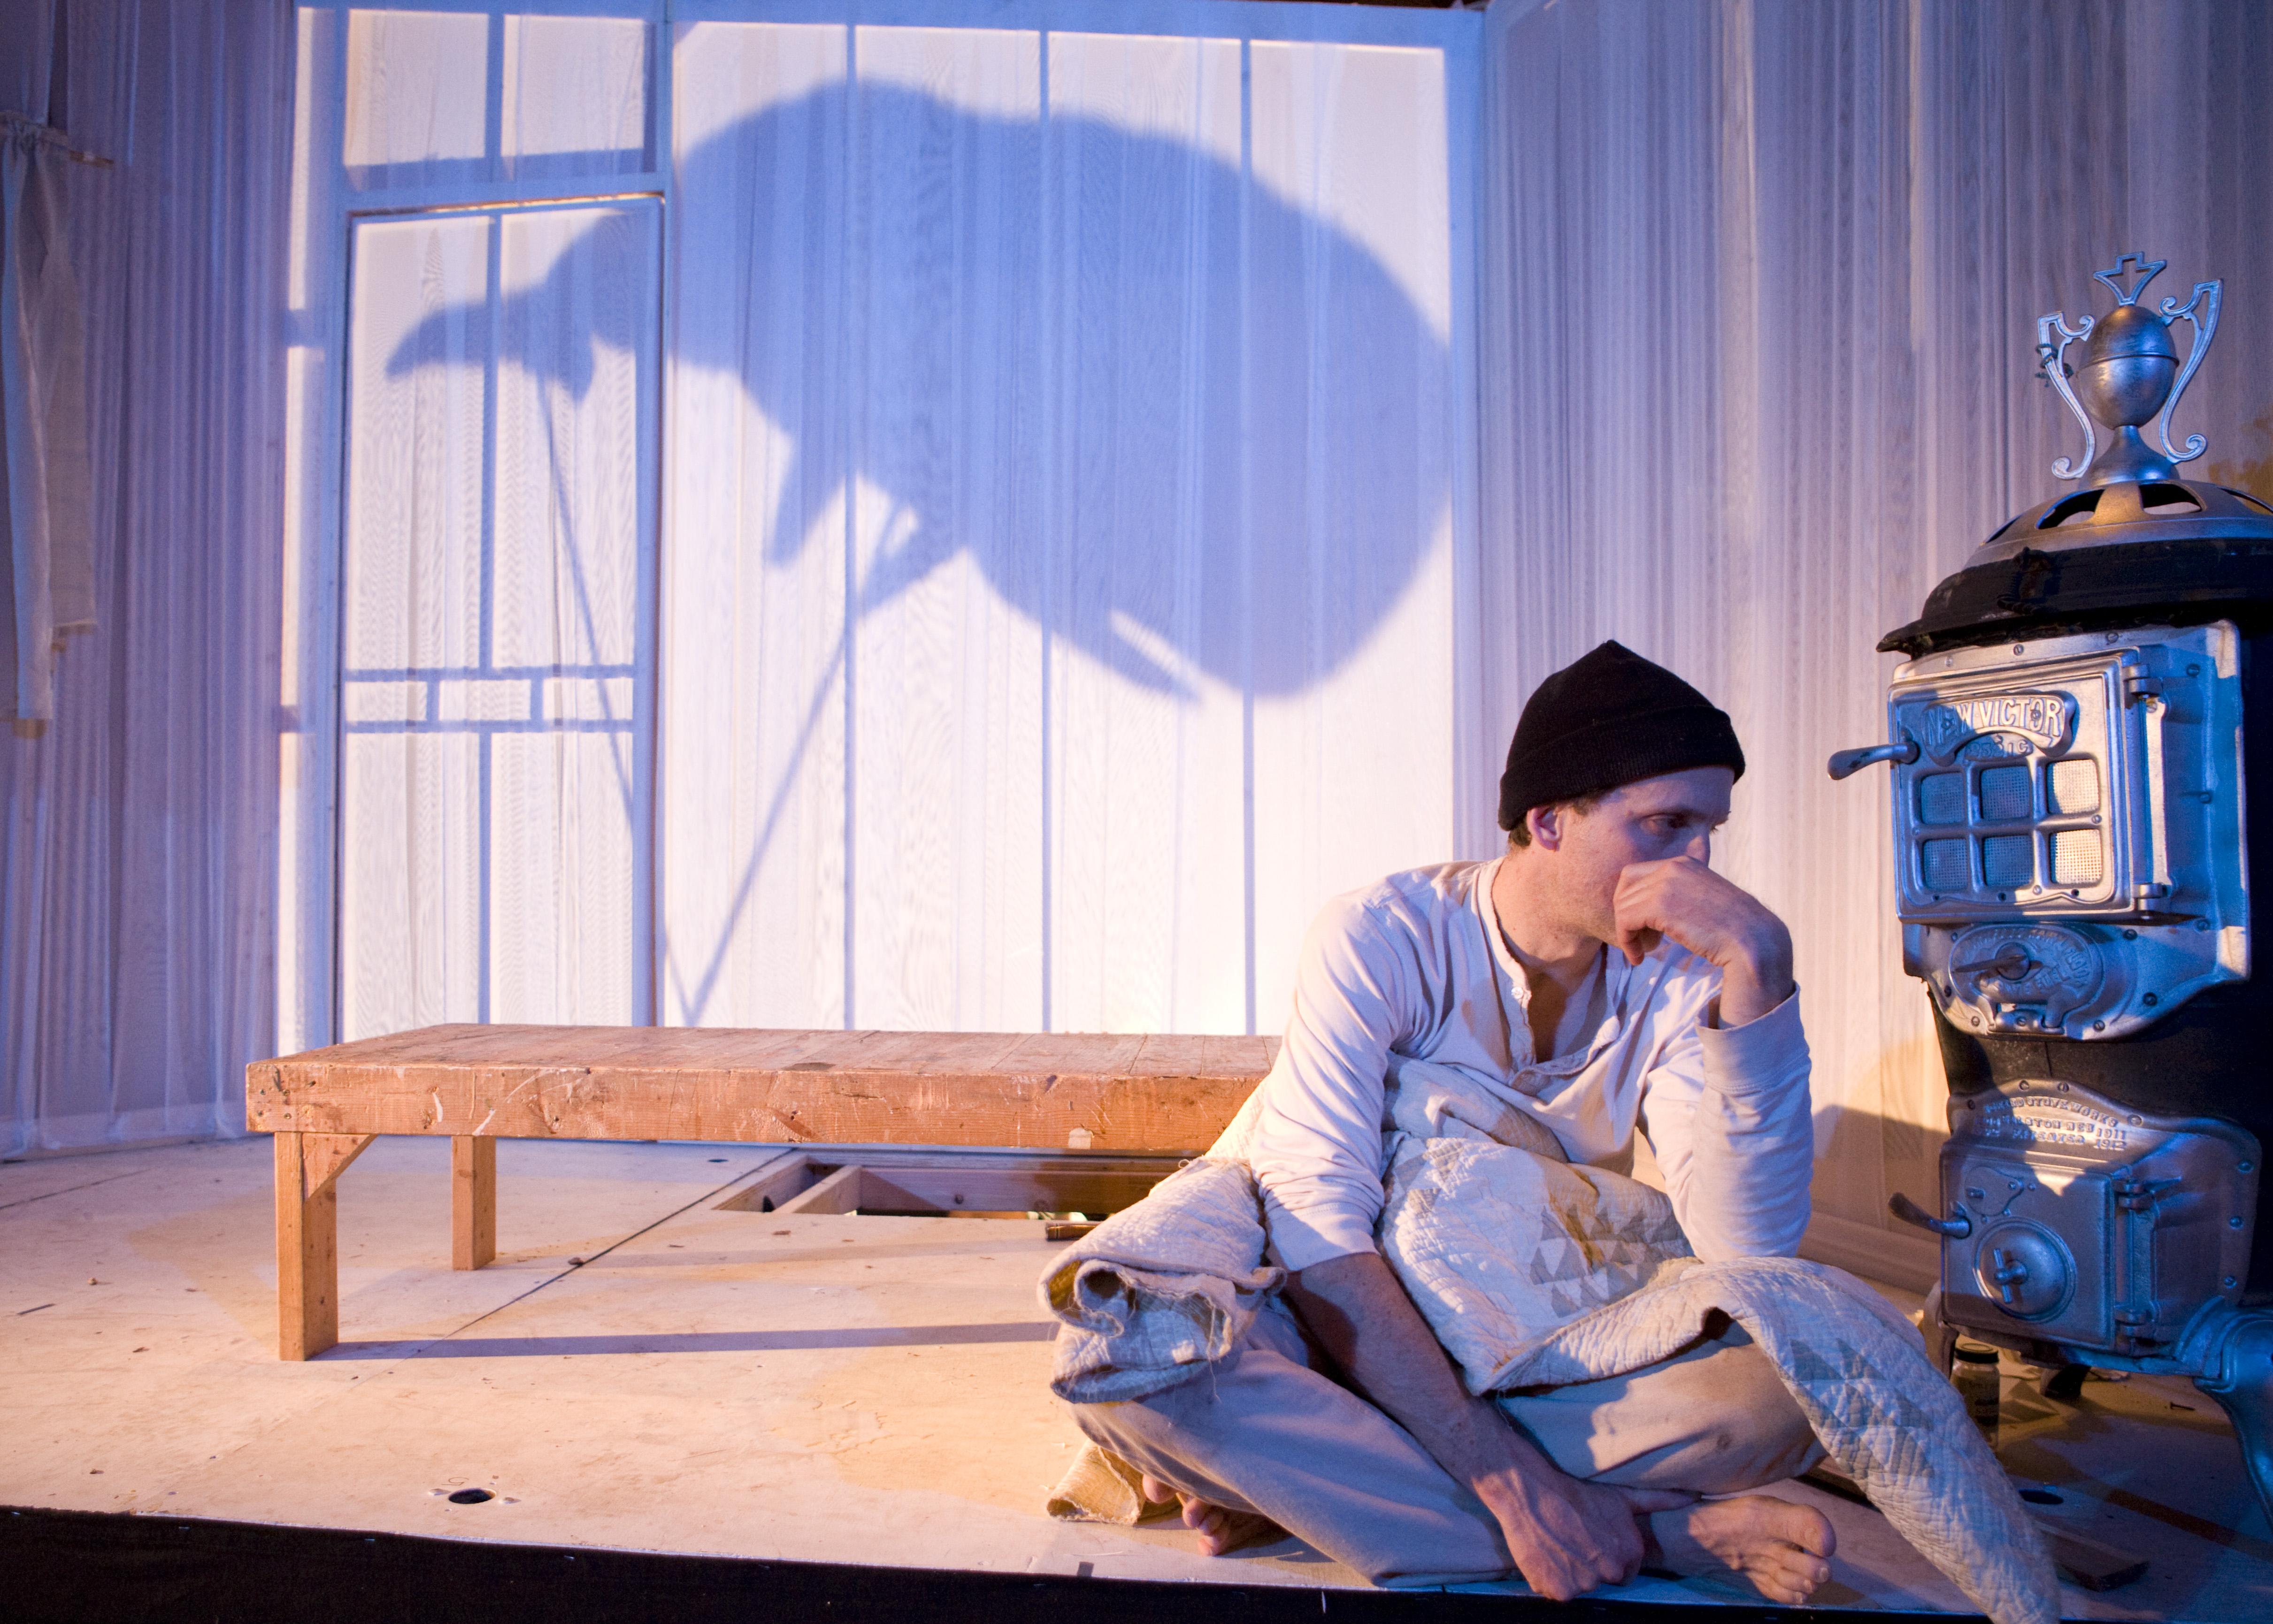 A man sits dejectedly on a small stage in front of a wooden bench and a wood-burning stove. A whale shadow puppet appears on the white curtain backdrop.